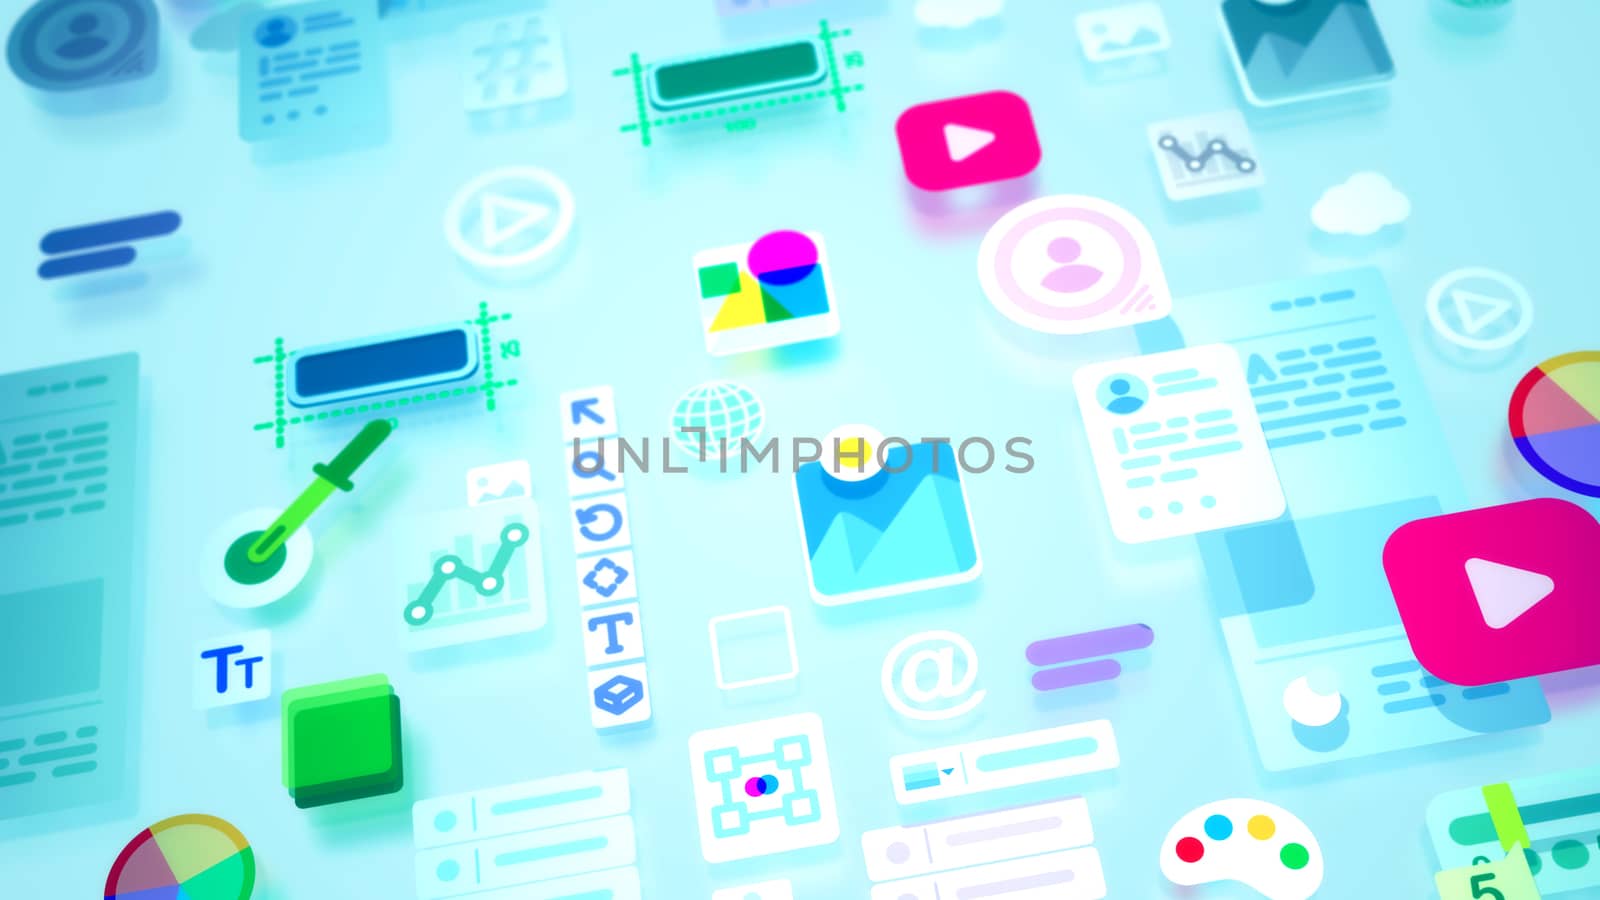 A cheery 3d illustration of colorful interface elements including such icons as personal data, number, enter, at sign, person, pie chart, healthcare, temperature, text and so on. They look childish.